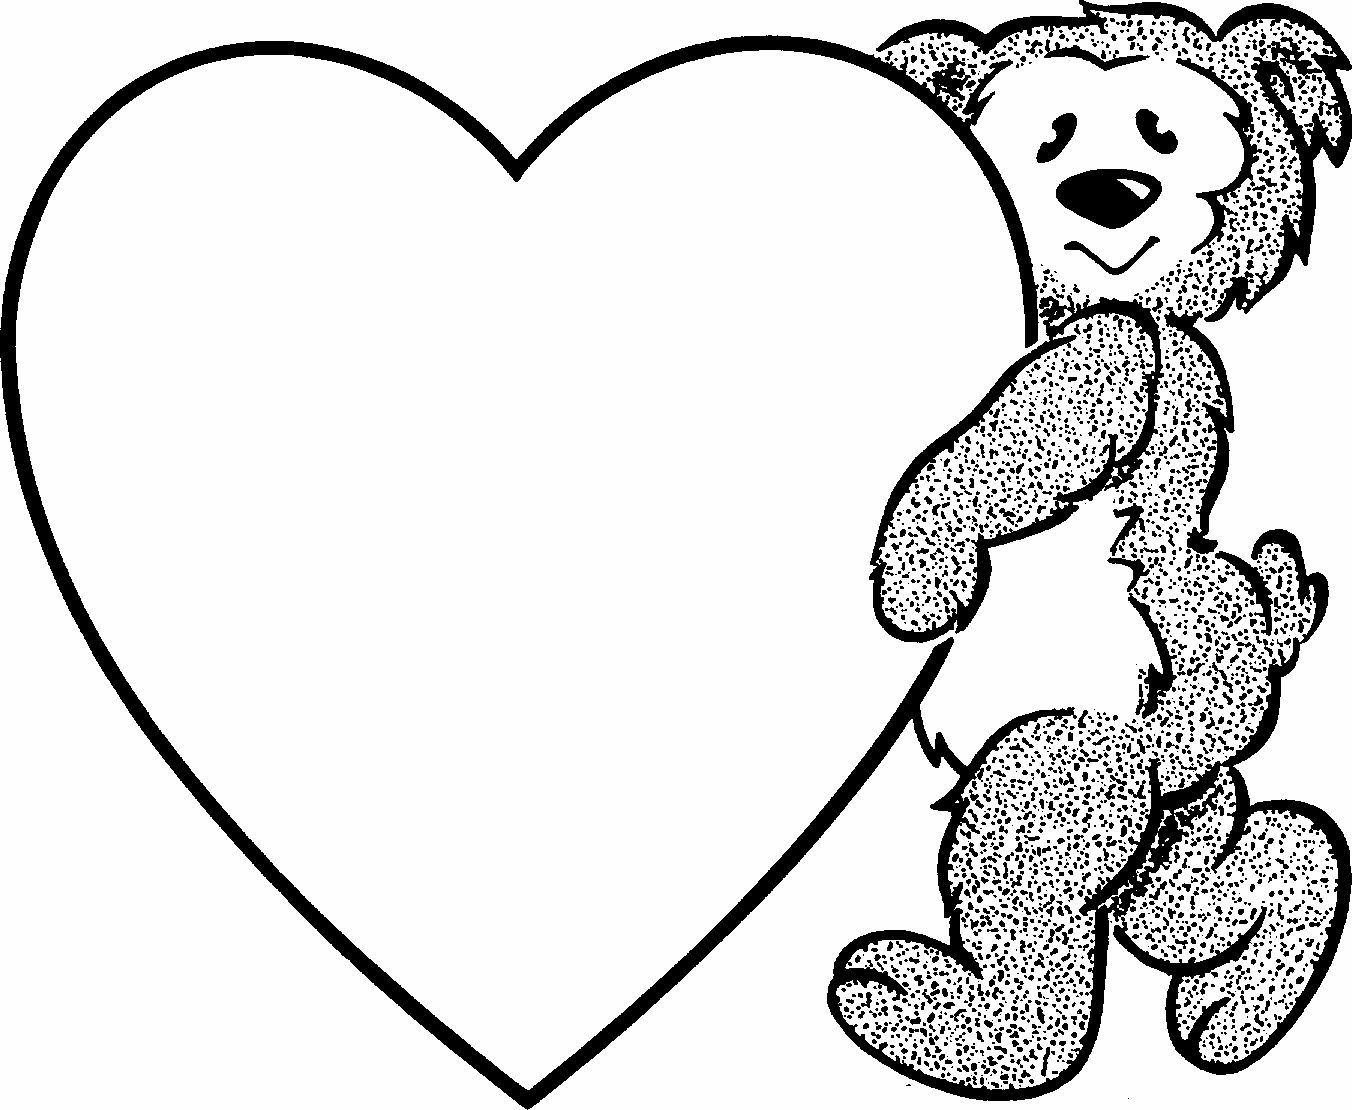 Friendship Coloring Pages For Kids | Coloring Pages For Kids ...